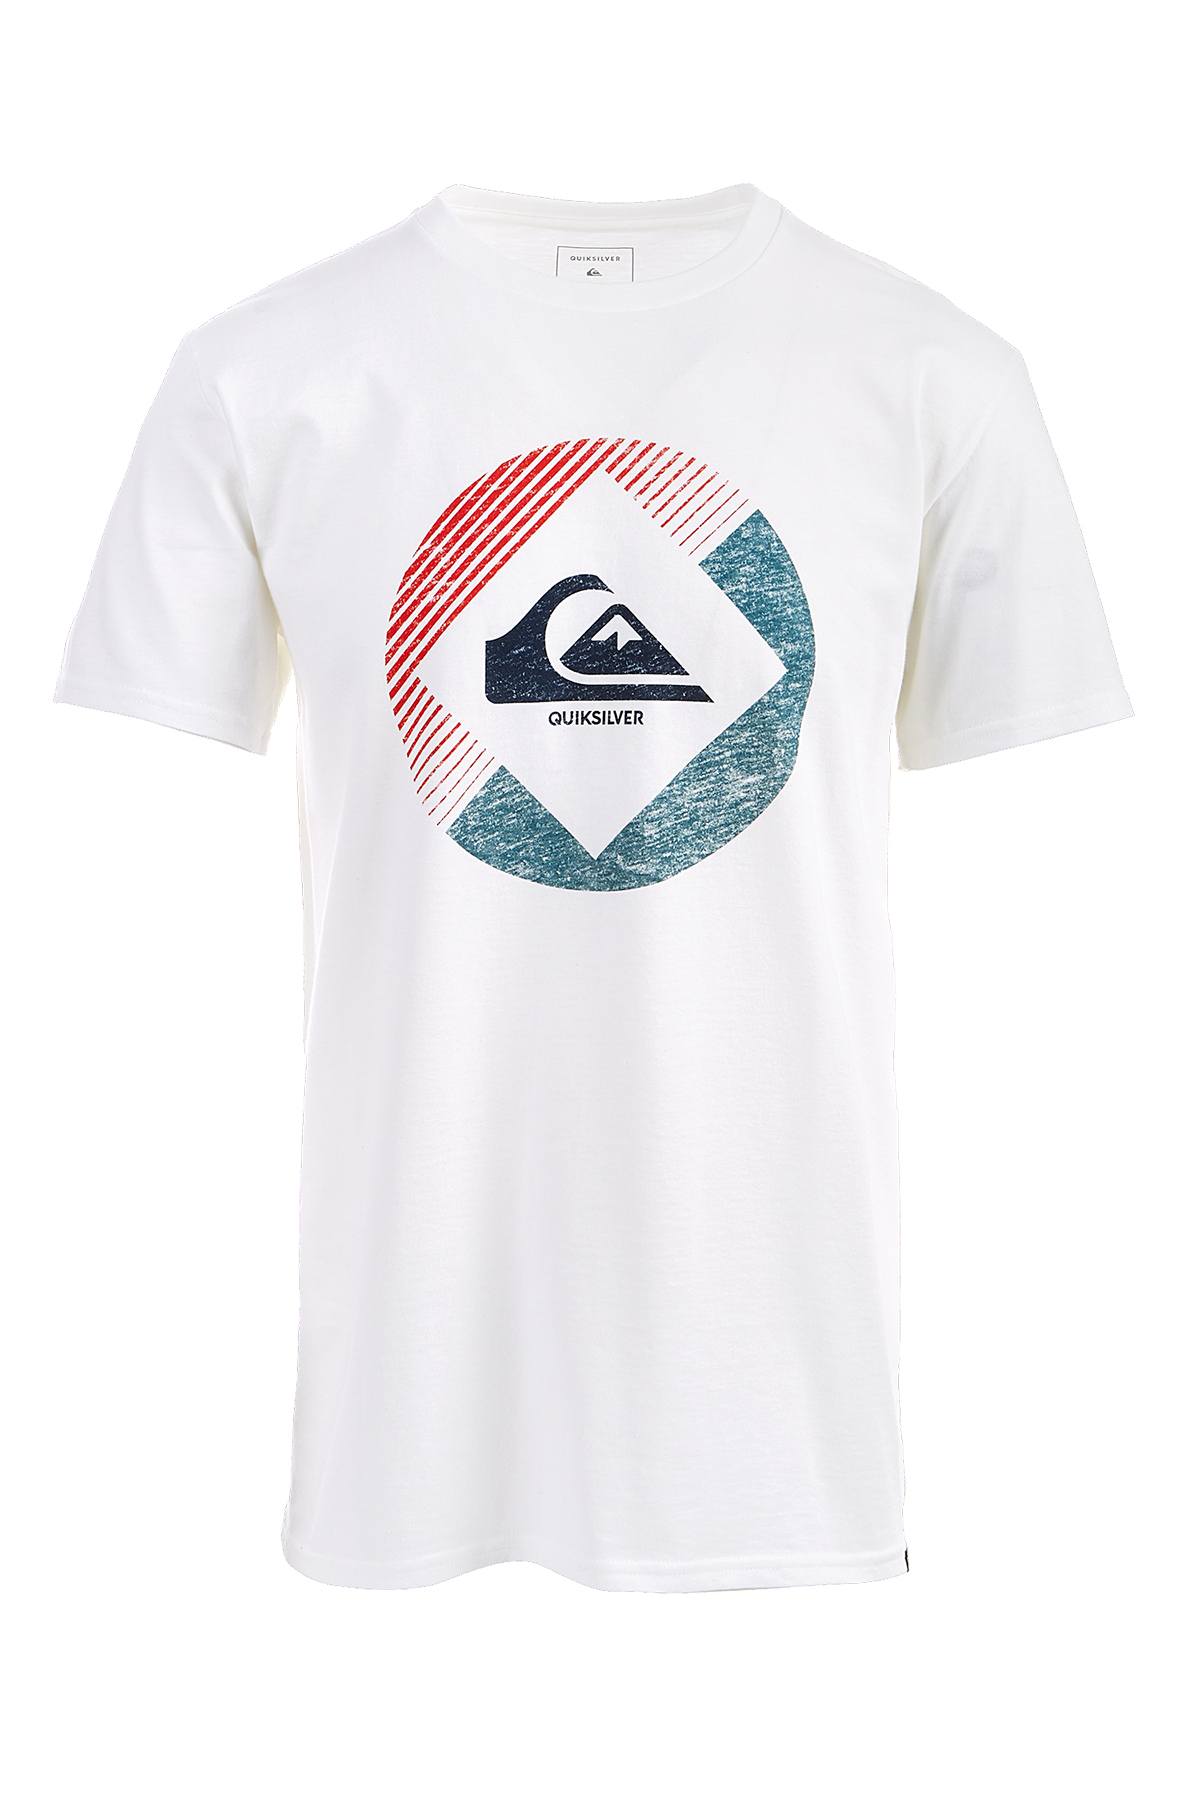 Quiksilver White Hot-Plate Graphic-Print T-Shirt